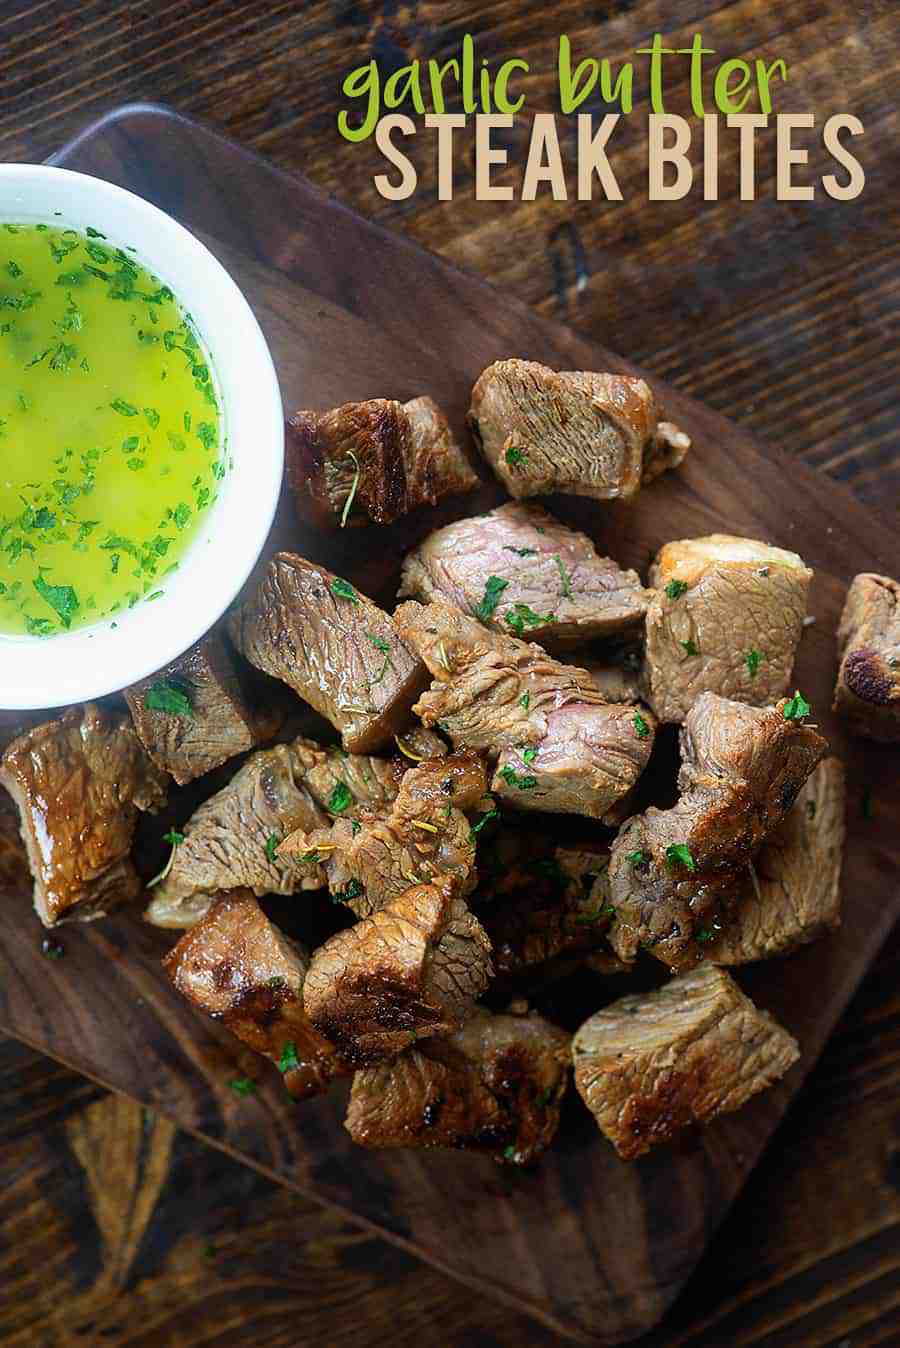 Steak bites cut up on a wooden plate with a cup of garlic butter.